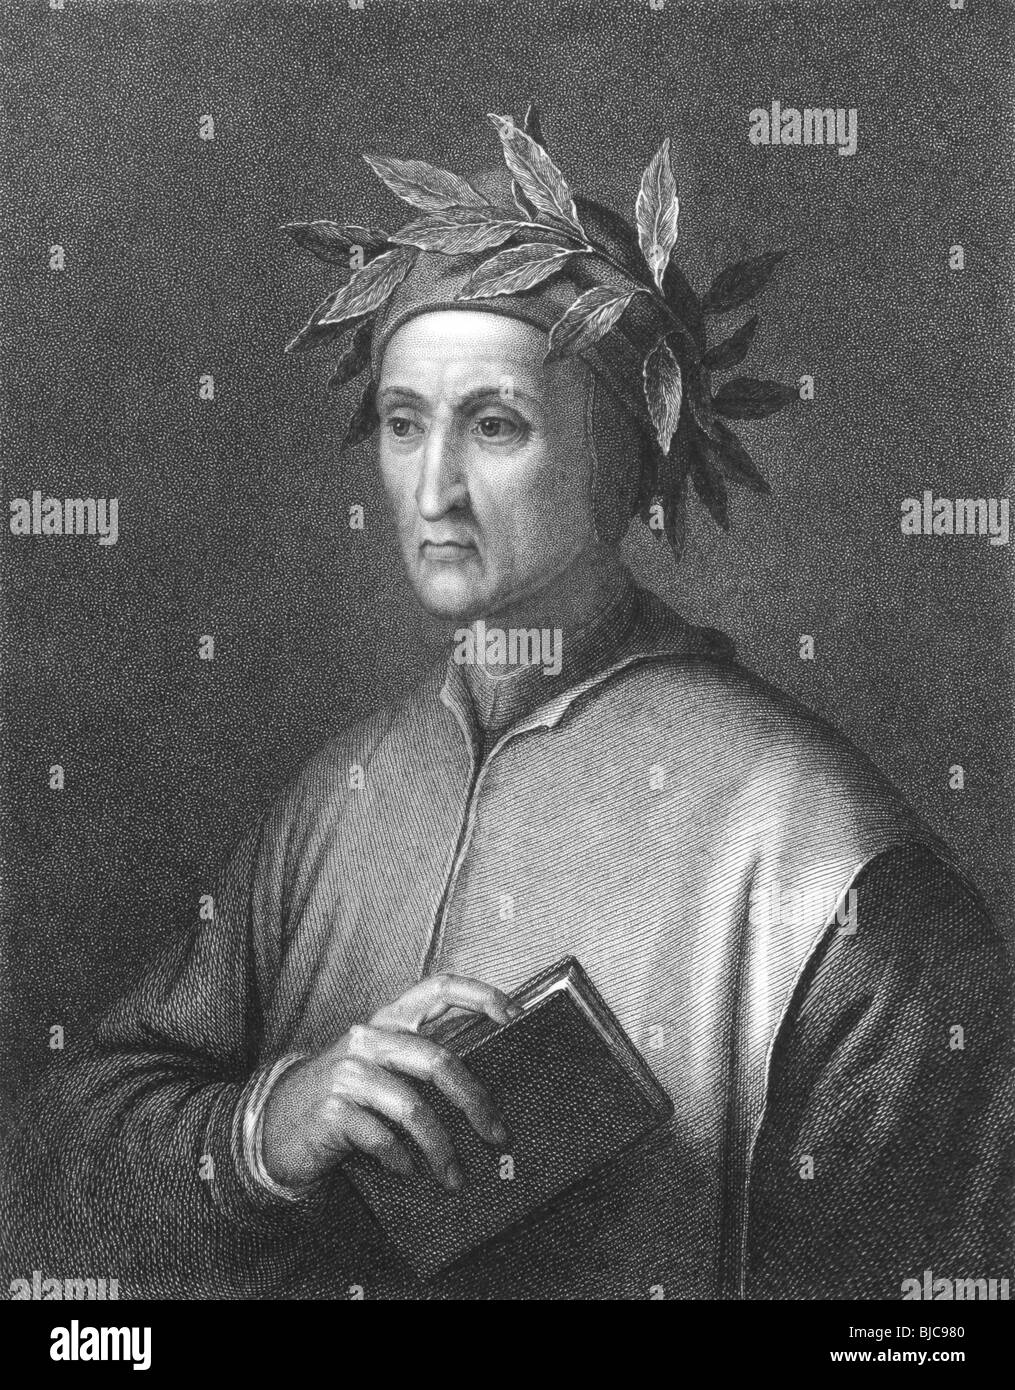 Dante Alighieri (1265 -1321) on engraving from the 1800s. Italian poet of the Middle Ages. Stock Photo